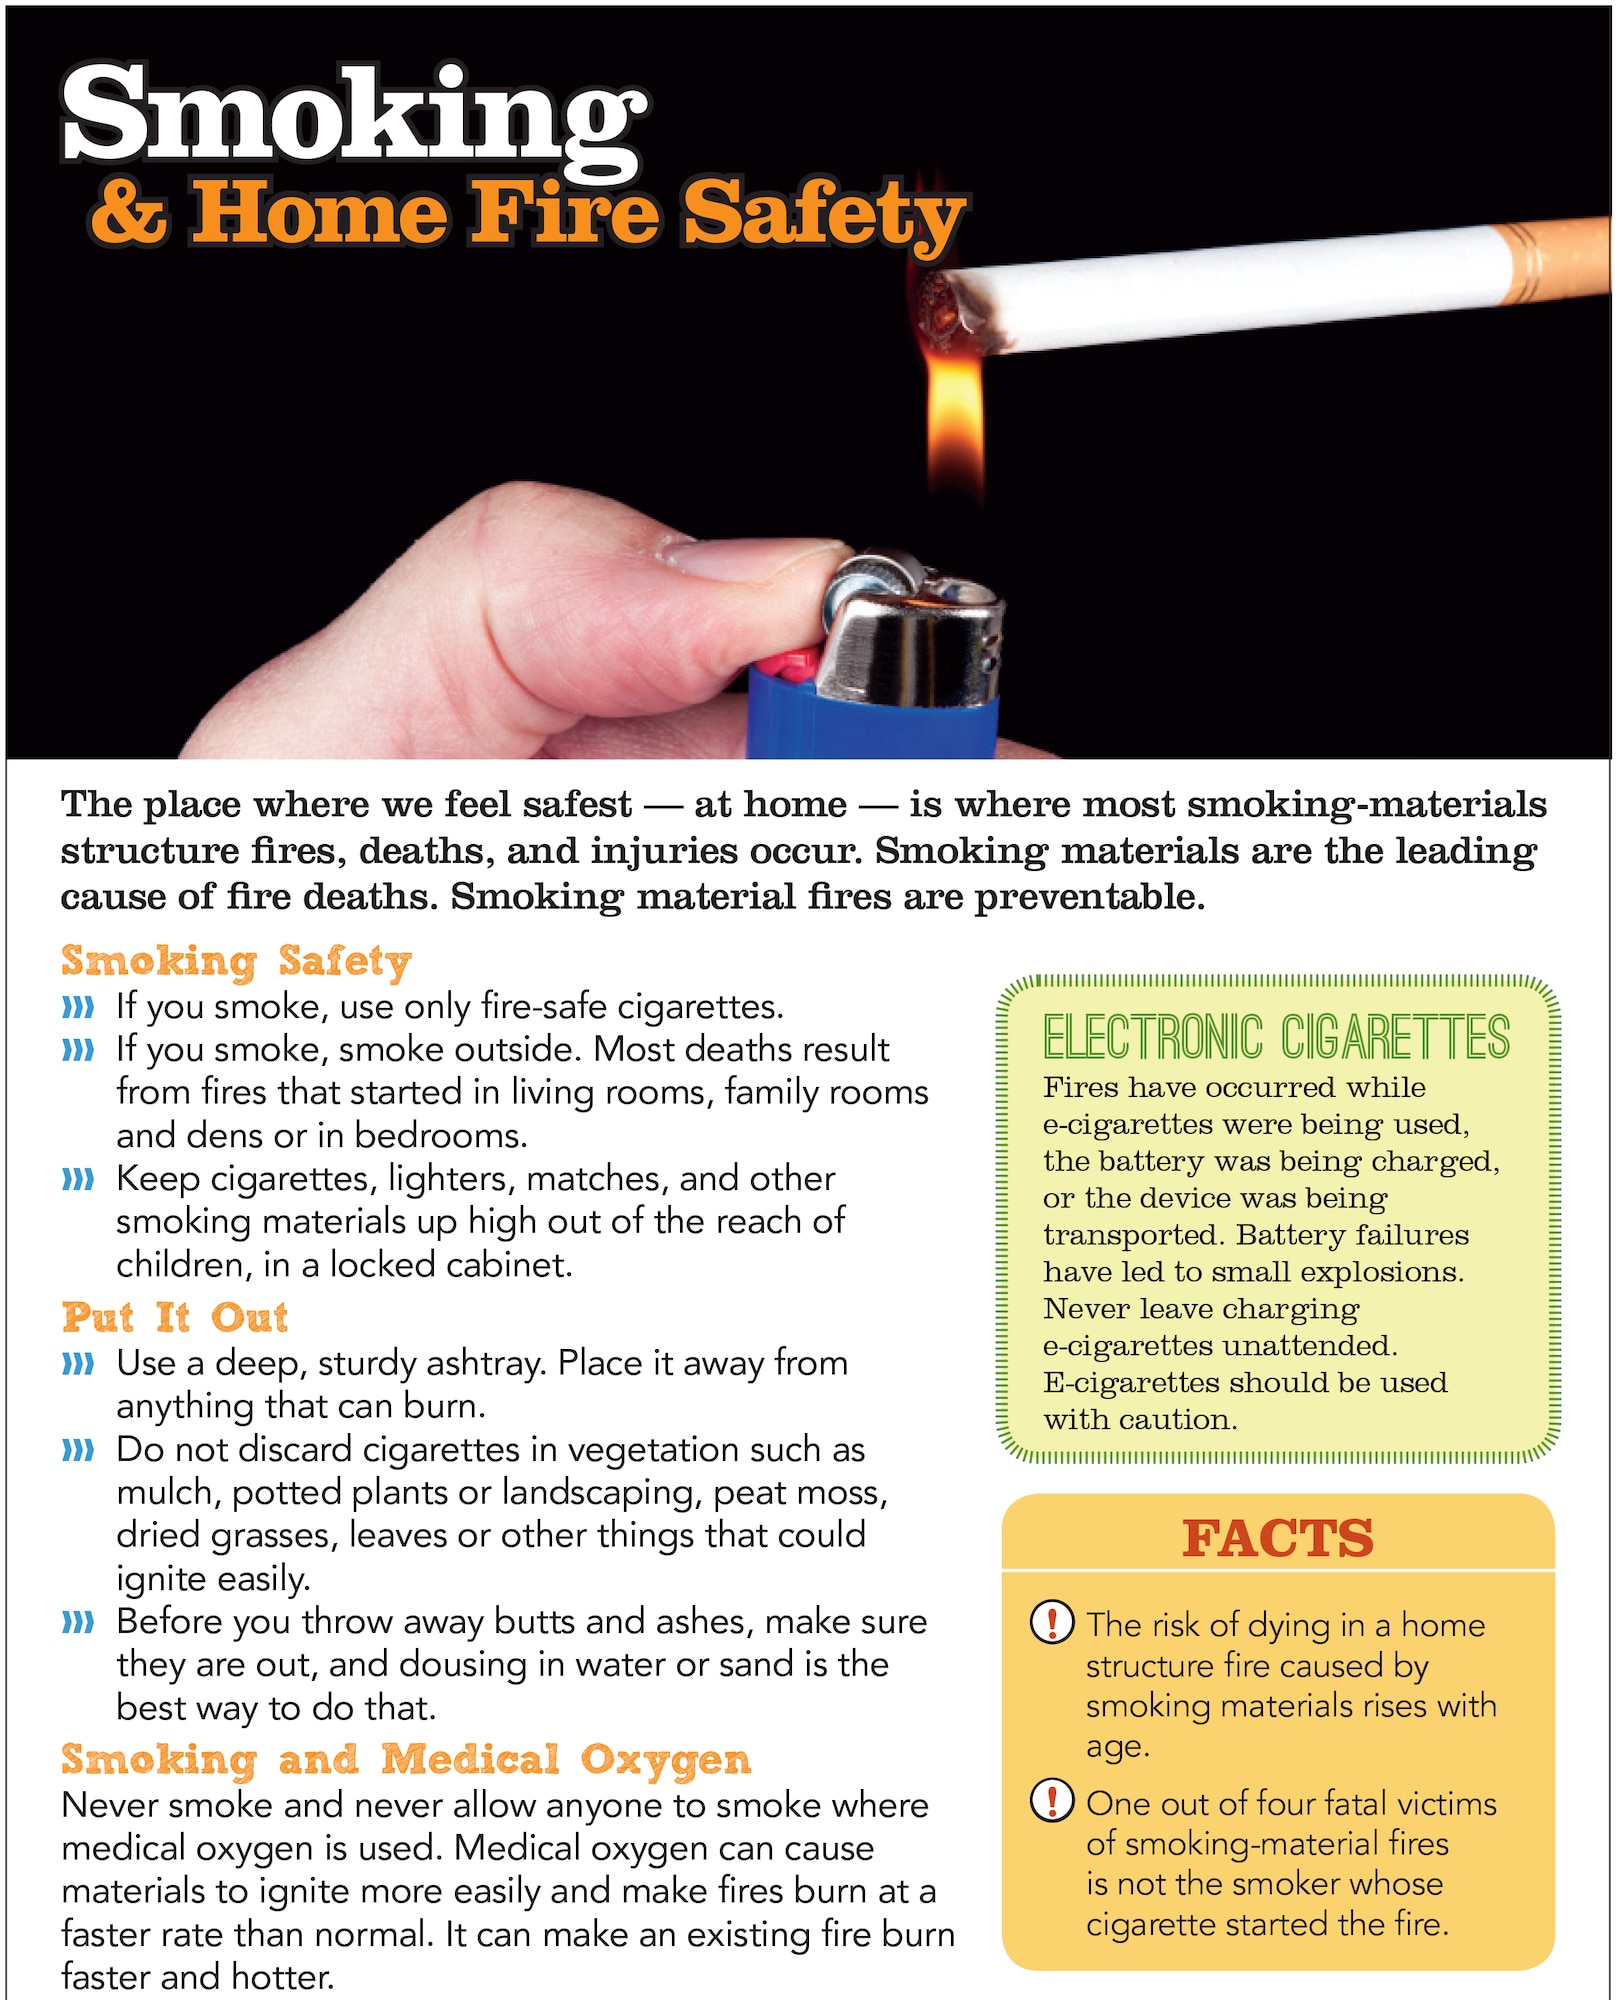 Fire risk from discarded smoking materials increasing across Texas